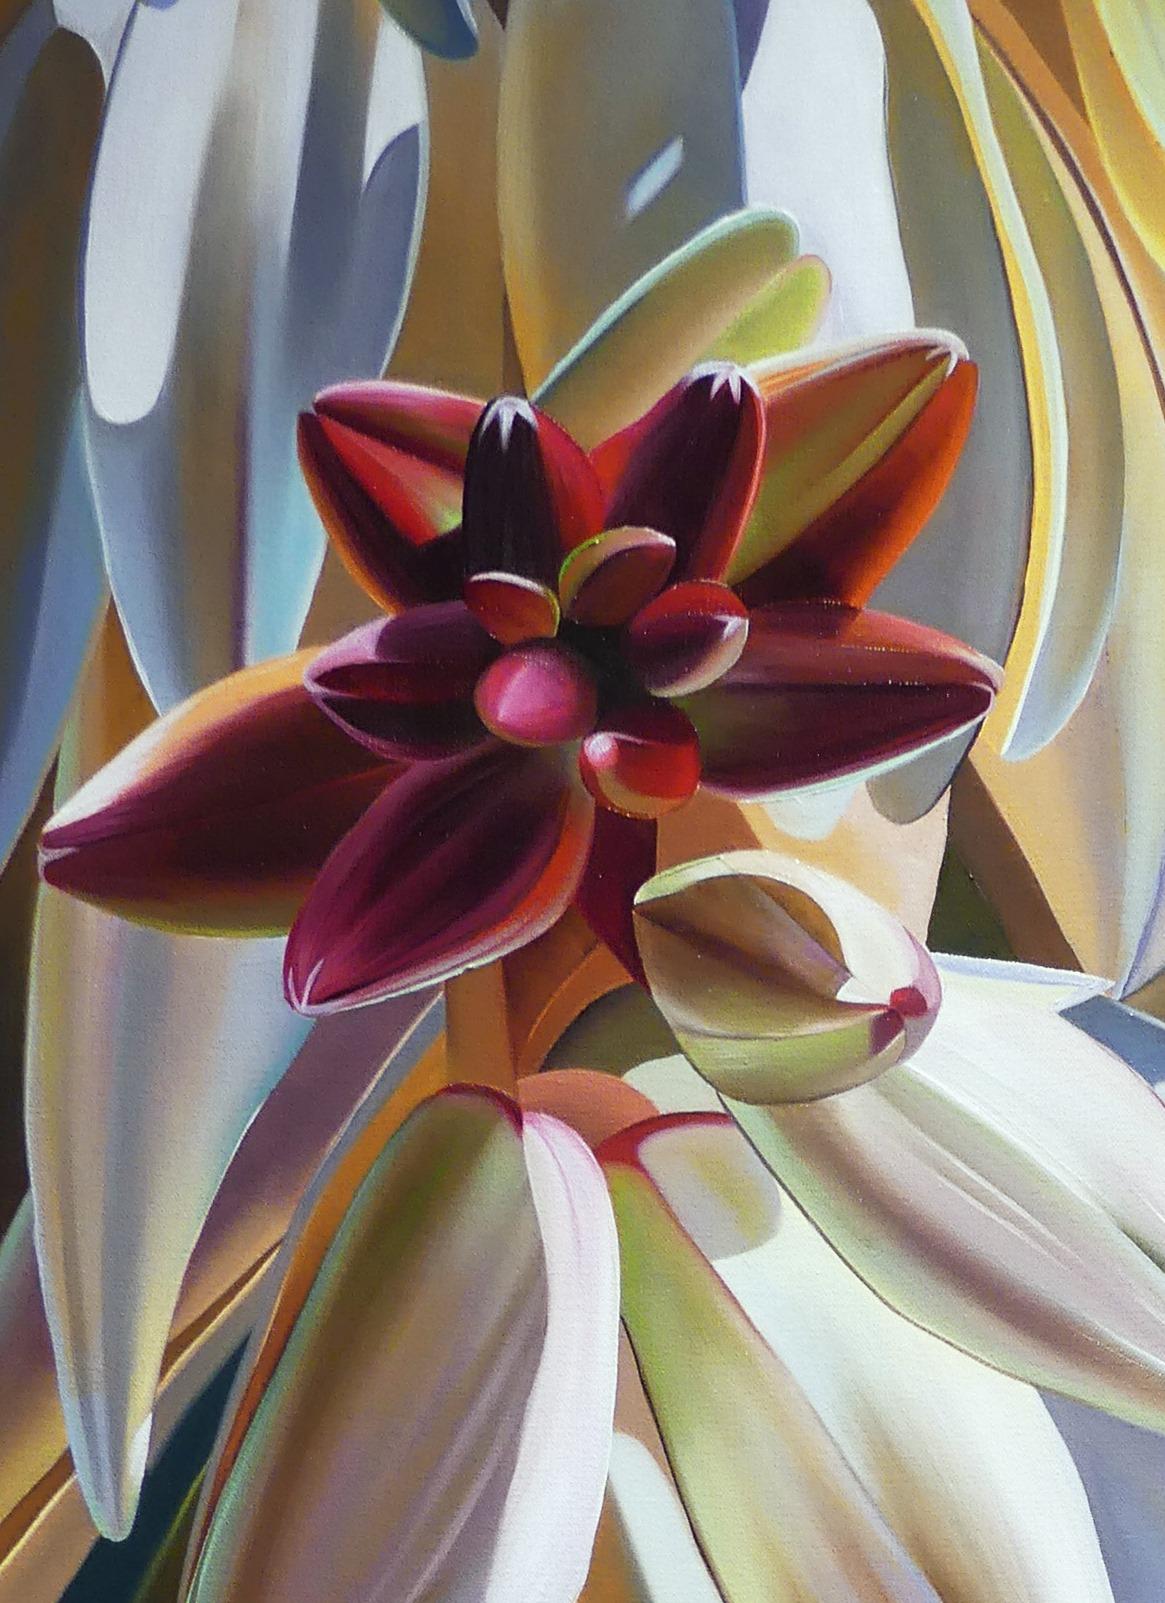 Dyana Hesson refers to herself as a botanical artist. She was born in 1966 in the Gold Country of California where she was happiest outdoors. Her weekends were spent with trips to the local nursery and planting and weeding the natural landscaping of